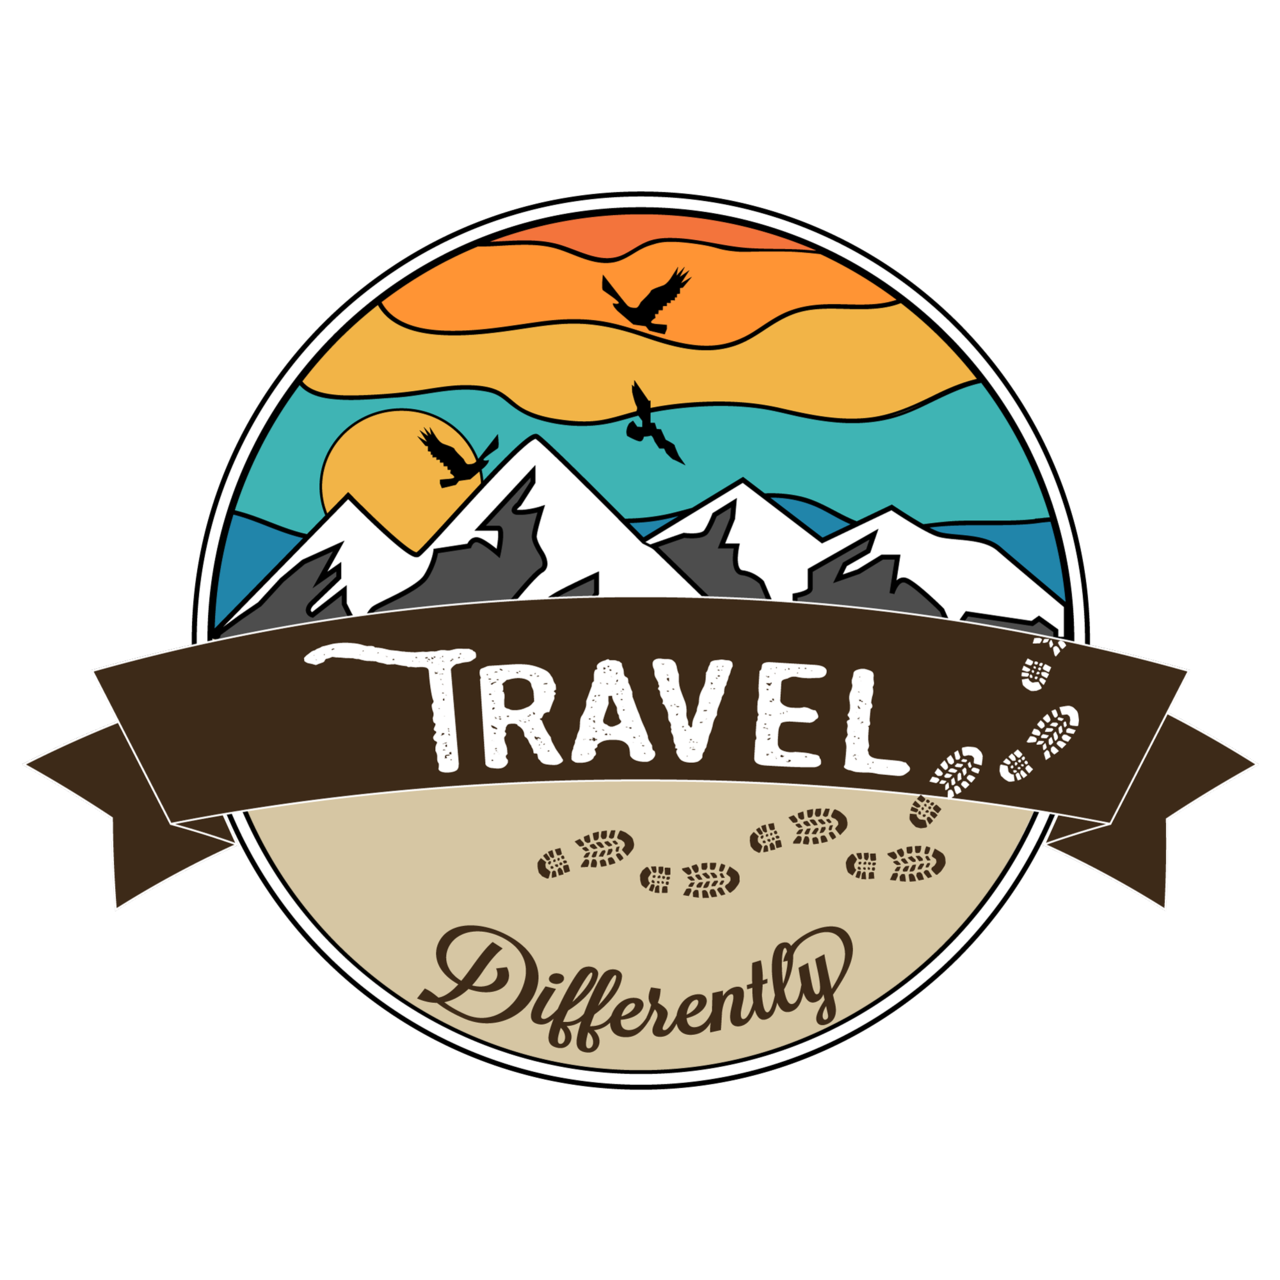 Welcome to Travel Differently! \ud83d\udc4b